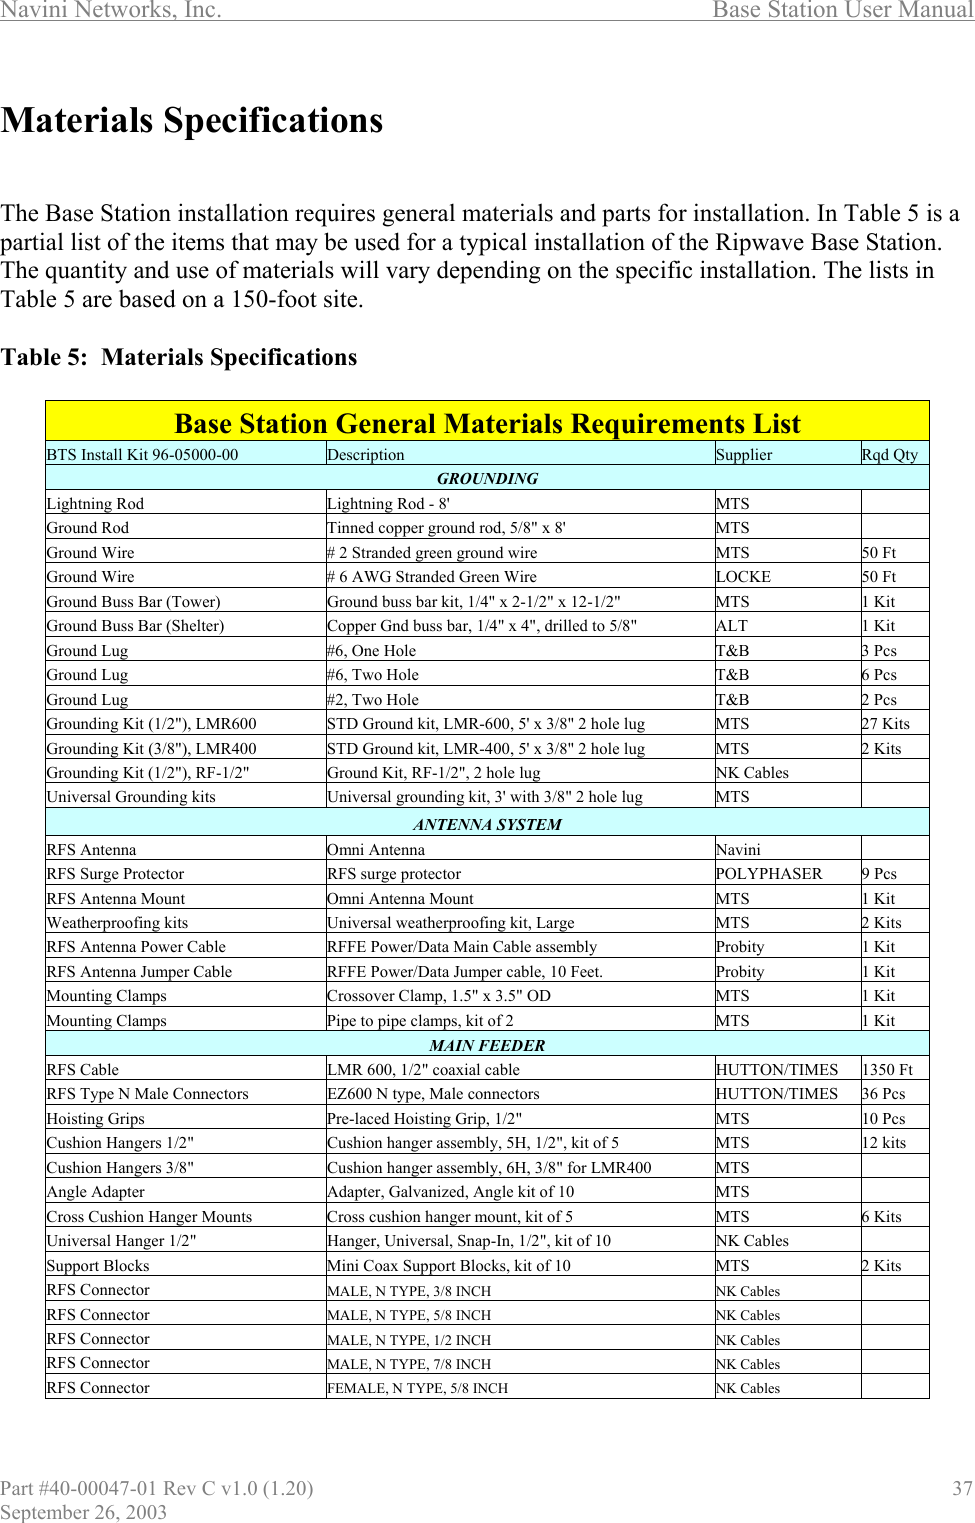 Navini Networks, Inc.                                  Base Station User Manual  Materials Specifications    The Base Station installation requires general materials and parts for installation. In Table 5 is a partial list of the items that may be used for a typical installation of the Ripwave Base Station. The quantity and use of materials will vary depending on the specific installation. The lists in Table 5 are based on a 150-foot site.   Table 5:  Materials Specifications  Base Station General Materials Requirements List BTS Install Kit 96-05000-00  Description  Supplier  Rqd Qty GROUNDING Lightning Rod  Lightning Rod - 8&apos;  MTS    Ground Rod  Tinned copper ground rod, 5/8&quot; x 8&apos;  MTS    Ground Wire  # 2 Stranded green ground wire  MTS  50 Ft Ground Wire  # 6 AWG Stranded Green Wire  LOCKE  50 Ft Ground Buss Bar (Tower)  Ground buss bar kit, 1/4&quot; x 2-1/2&quot; x 12-1/2&quot;  MTS  1 Kit Ground Buss Bar (Shelter)  Copper Gnd buss bar, 1/4&quot; x 4&quot;, drilled to 5/8&quot;  ALT  1 Kit Ground Lug  #6, One Hole  T&amp;B  3 Pcs Ground Lug  #6, Two Hole  T&amp;B  6 Pcs Ground Lug  #2, Two Hole  T&amp;B  2 Pcs Grounding Kit (1/2&quot;), LMR600  STD Ground kit, LMR-600, 5&apos; x 3/8&quot; 2 hole lug  MTS  27 Kits Grounding Kit (3/8&quot;), LMR400  STD Ground kit, LMR-400, 5&apos; x 3/8&quot; 2 hole lug  MTS  2 Kits Grounding Kit (1/2&quot;), RF-1/2&quot;  Ground Kit, RF-1/2&quot;, 2 hole lug NK Cables    Universal Grounding kits  Universal grounding kit, 3&apos; with 3/8&quot; 2 hole lug  MTS    ANTENNA SYSTEM RFS Antenna  Omni Antenna Navini   RFS Surge Protector  RFS surge protector  POLYPHASER  9 Pcs RFS Antenna Mount  Omni Antenna Mount  MTS  1 Kit Weatherproofing kits  Universal weatherproofing kit, Large   MTS  2 Kits RFS Antenna Power Cable  RFFE Power/Data Main Cable assembly  Probity  1 Kit RFS Antenna Jumper Cable  RFFE Power/Data Jumper cable, 10 Feet.  Probity  1 Kit Mounting Clamps  Crossover Clamp, 1.5&quot; x 3.5&quot; OD  MTS  1 Kit Mounting Clamps  Pipe to pipe clamps, kit of 2  MTS  1 Kit MAIN FEEDER RFS Cable  LMR 600, 1/2&quot; coaxial cable  HUTTON/TIMES  1350 Ft RFS Type N Male Connectors  EZ600 N type, Male connectors  HUTTON/TIMES  36 Pcs Hoisting Grips  Pre-laced Hoisting Grip, 1/2&quot;   MTS  10 Pcs Cushion Hangers 1/2&quot;  Cushion hanger assembly, 5H, 1/2&quot;, kit of 5  MTS  12 kits Cushion Hangers 3/8&quot;  Cushion hanger assembly, 6H, 3/8&quot; for LMR400  MTS    Angle Adapter  Adapter, Galvanized, Angle kit of 10  MTS    Cross Cushion Hanger Mounts  Cross cushion hanger mount, kit of 5  MTS  6 Kits Universal Hanger 1/2&quot;  Hanger, Universal, Snap-In, 1/2&quot;, kit of 10 NK Cables    Support Blocks  Mini Coax Support Blocks, kit of 10  MTS  2 Kits RFS Connector  MALE, N TYPE, 3/8 INCH NK Cables    RFS Connector  MALE, N TYPE, 5/8 INCH NK Cables    RFS Connector  MALE, N TYPE, 1/2 INCH NK Cables    RFS Connector  MALE, N TYPE, 7/8 INCH NK Cables    RFS Connector  FEMALE, N TYPE, 5/8 INCH NK Cables    Part #40-00047-01 Rev C v1.0 (1.20)                               37 September 26, 2003 